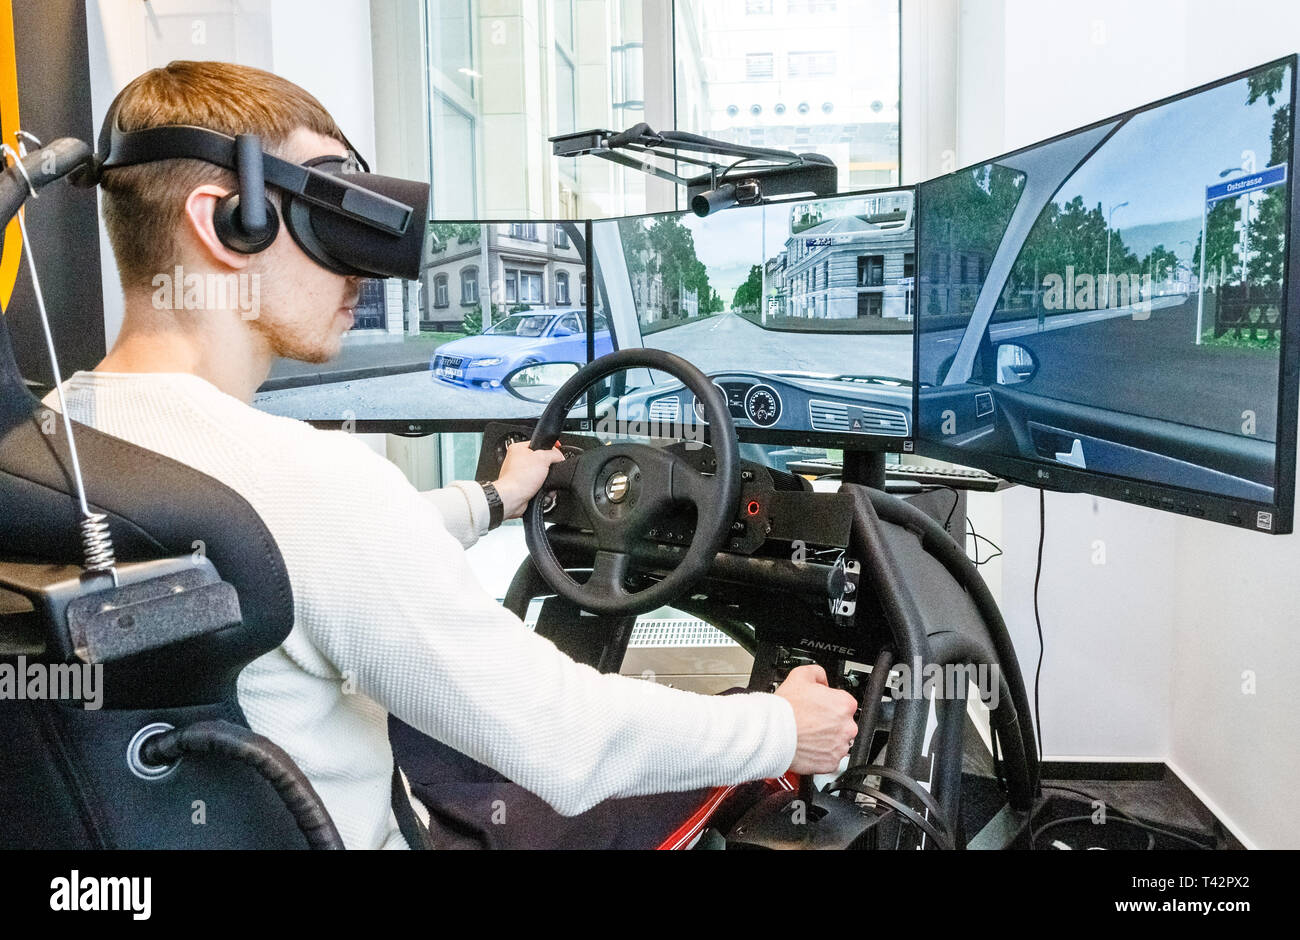 Hamburg, Germany. 13th Apr, 2019. A young man sits with VR (Virtual Reality) glasses in 360 degree driving simulator. By practicing in artificial reality, driving lessons are to be saved in